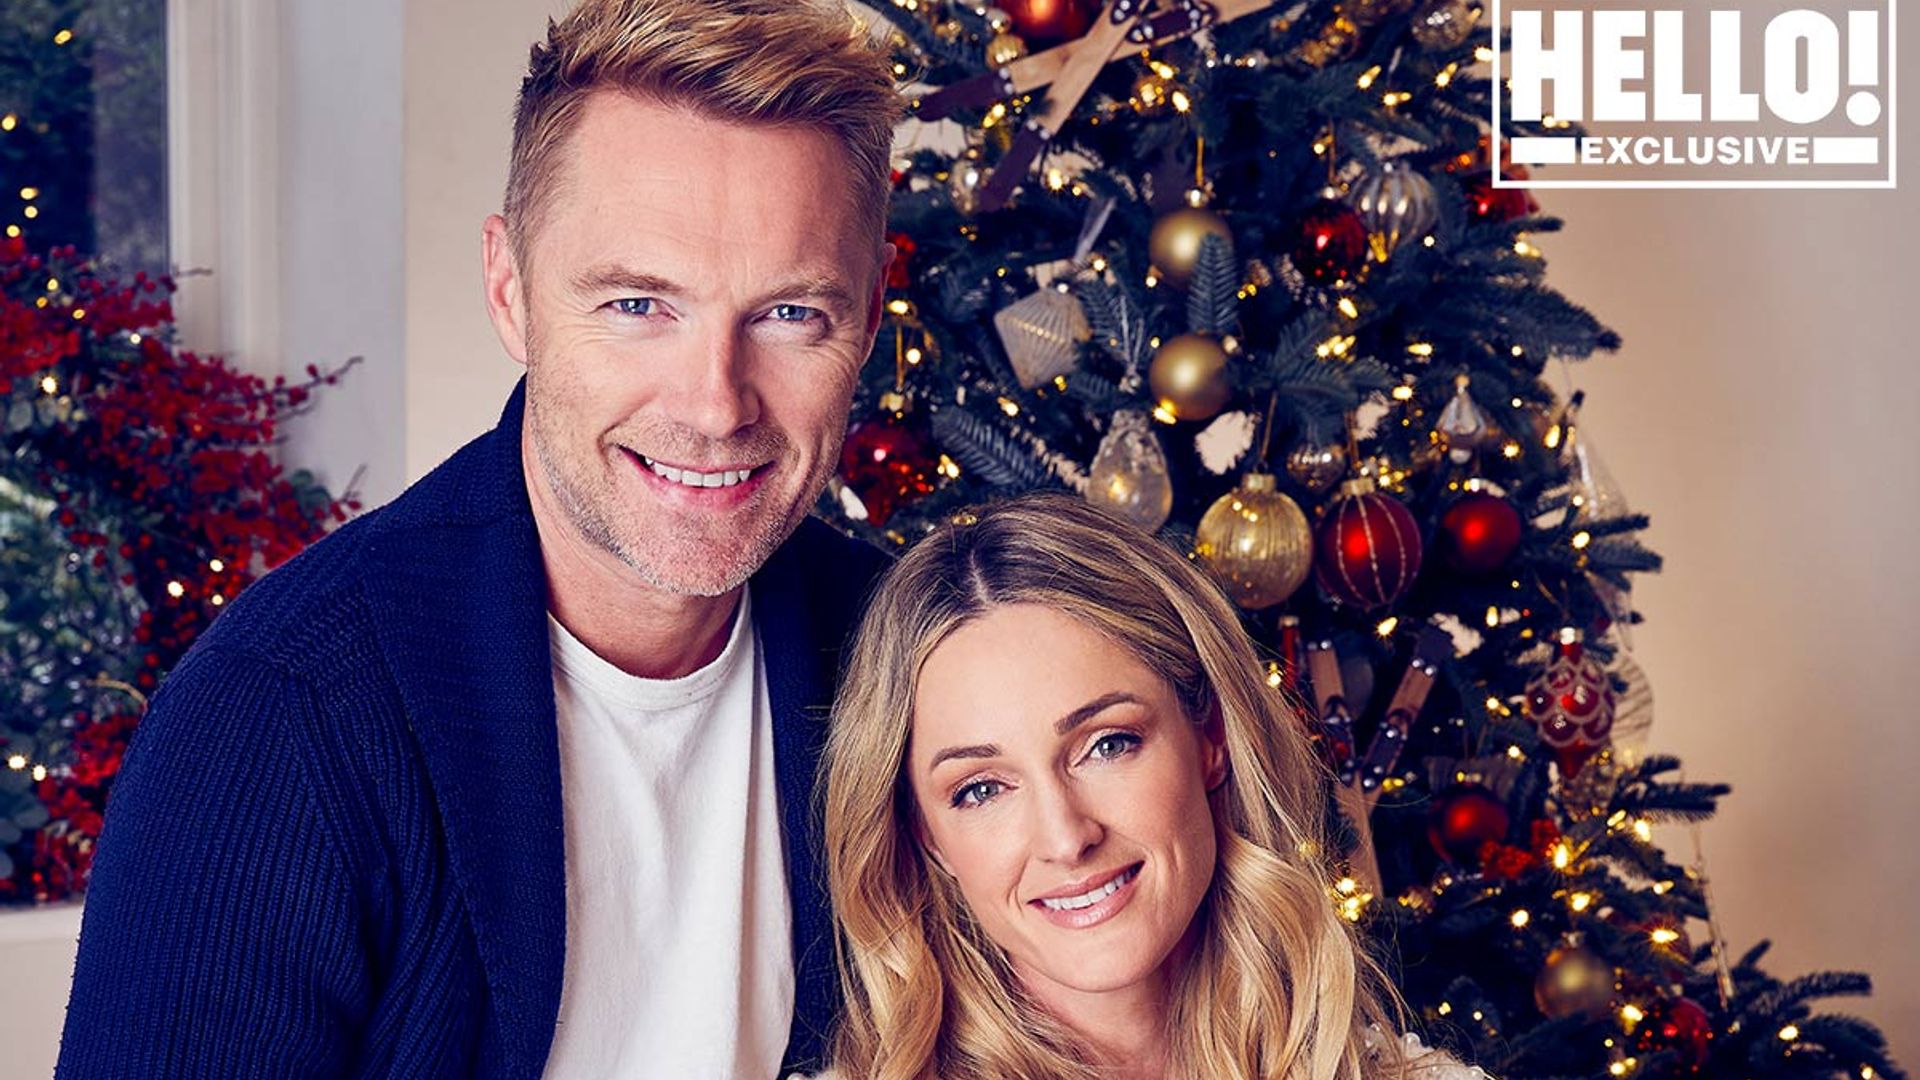 Ronan Keating and wife Storm's family Christmas to be extra special this year - exclusive